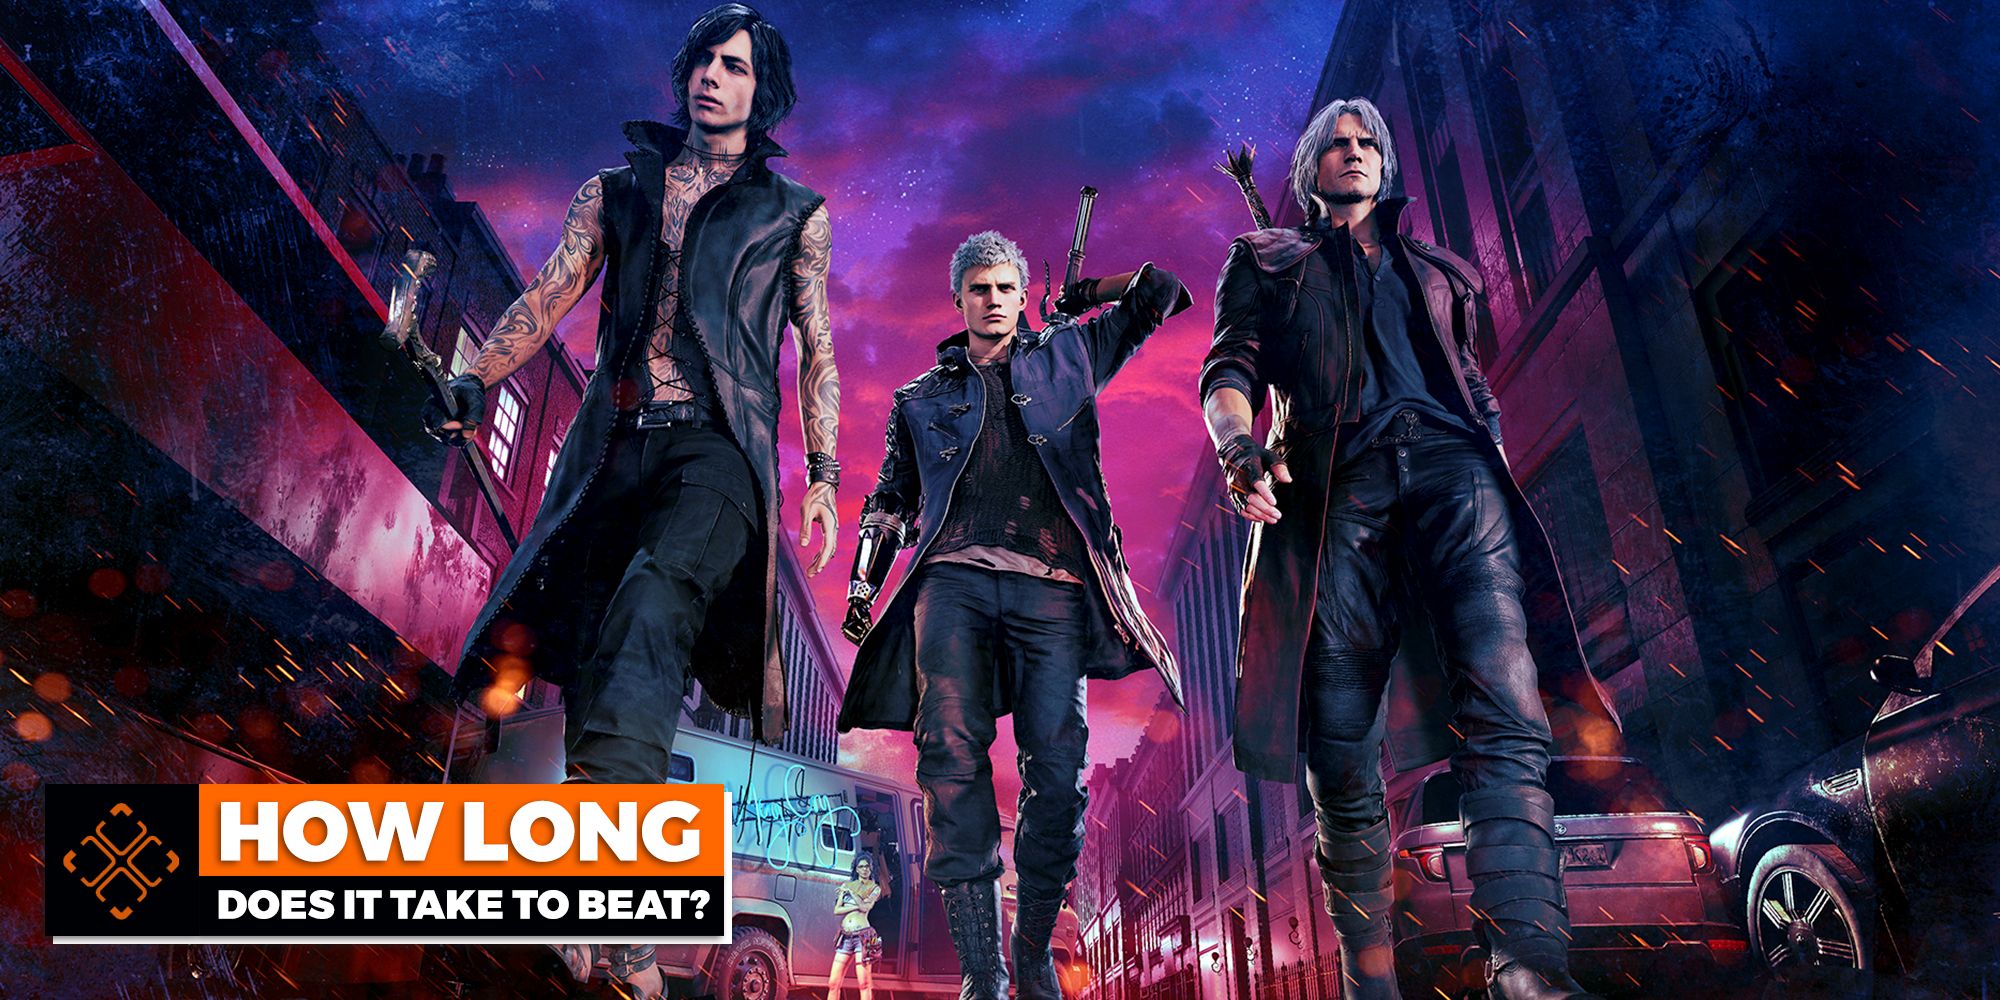 Game art from Devil May Cry 5.